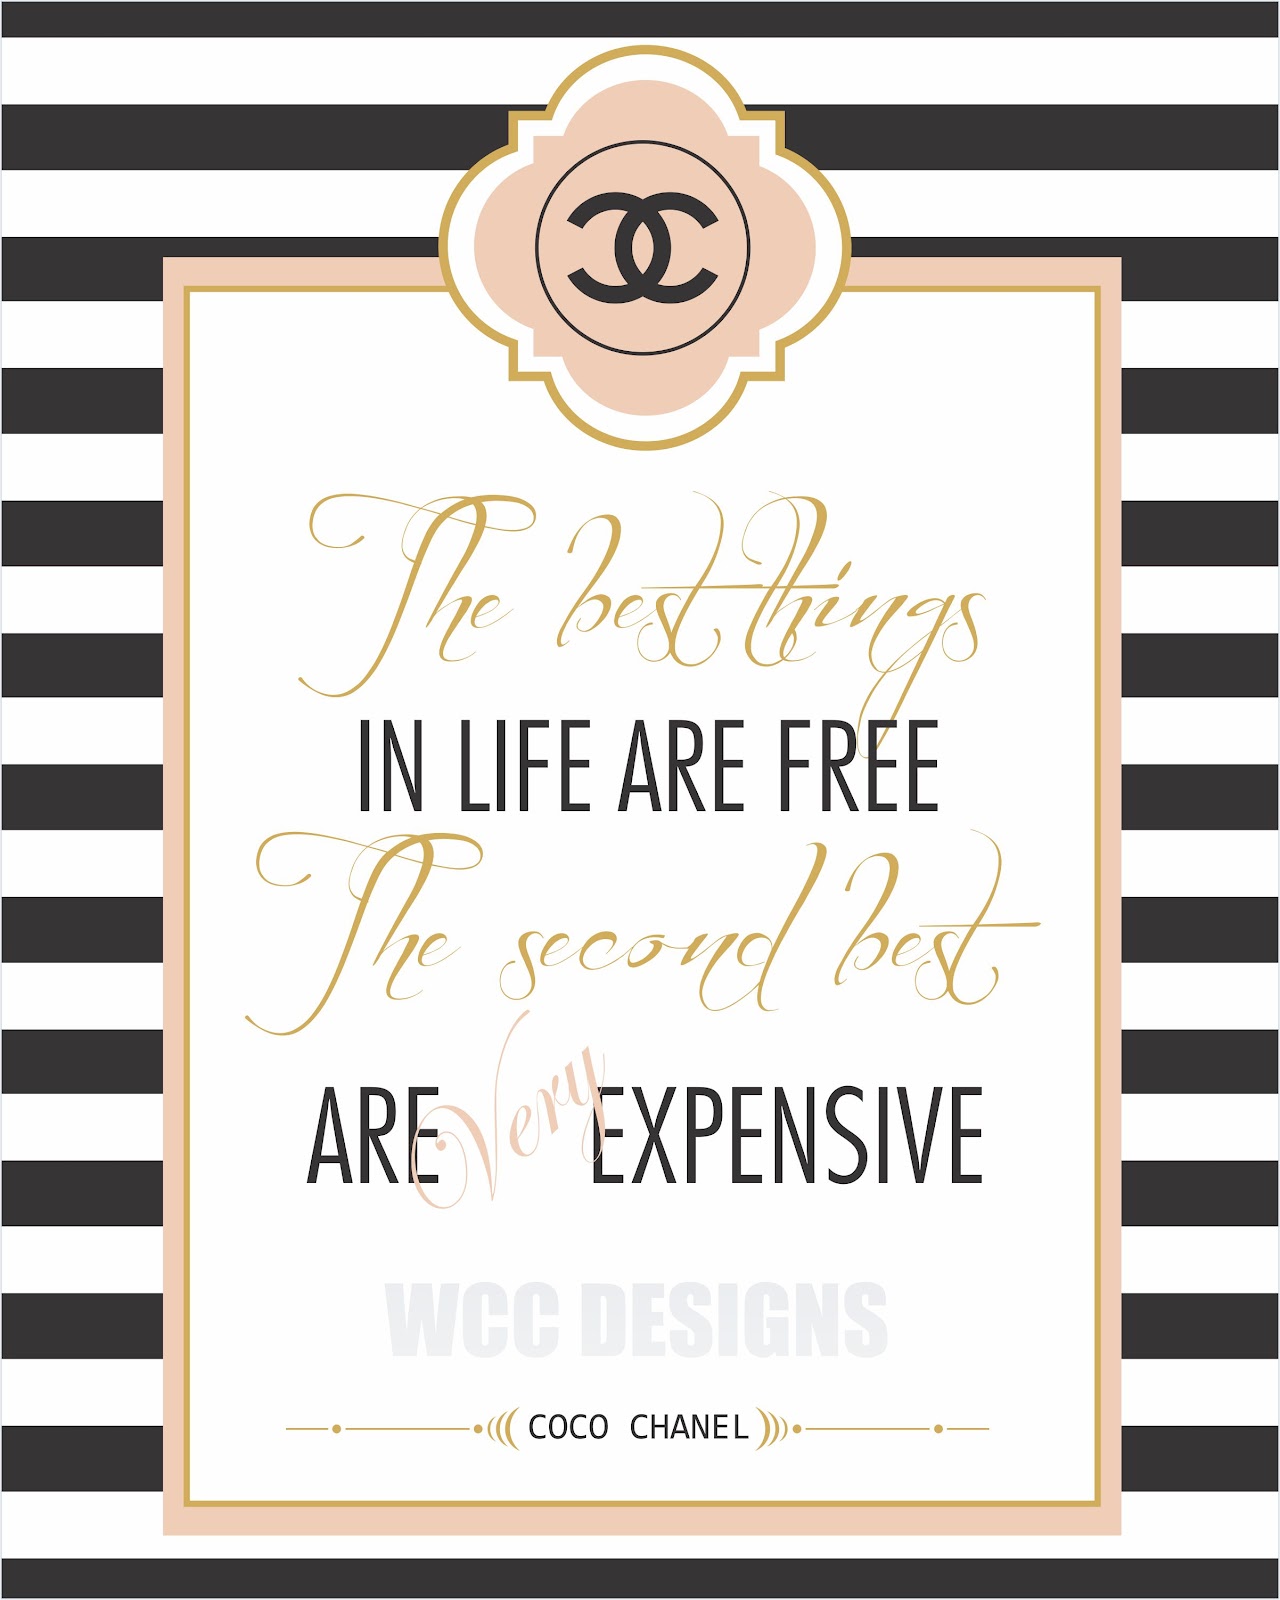 Coco Chanel Quotes On Hair. QuotesGram